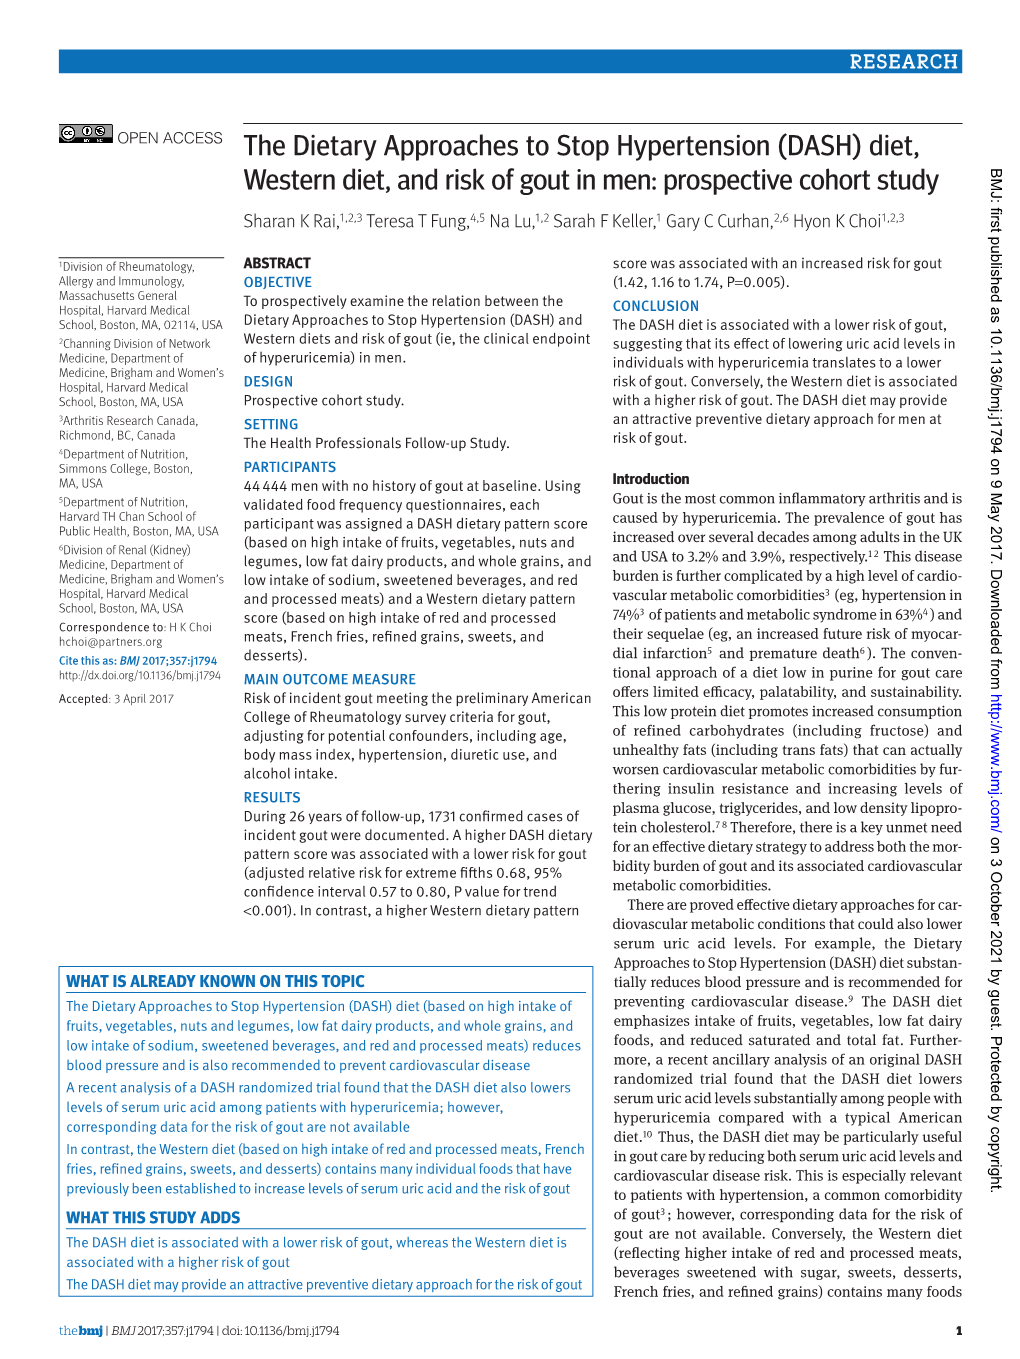 Western Diet, and Risk of Gout in Men: Prospective Cohort Study BMJ: First Published As 10.1136/Bmj.J1794 on 9 May 2017